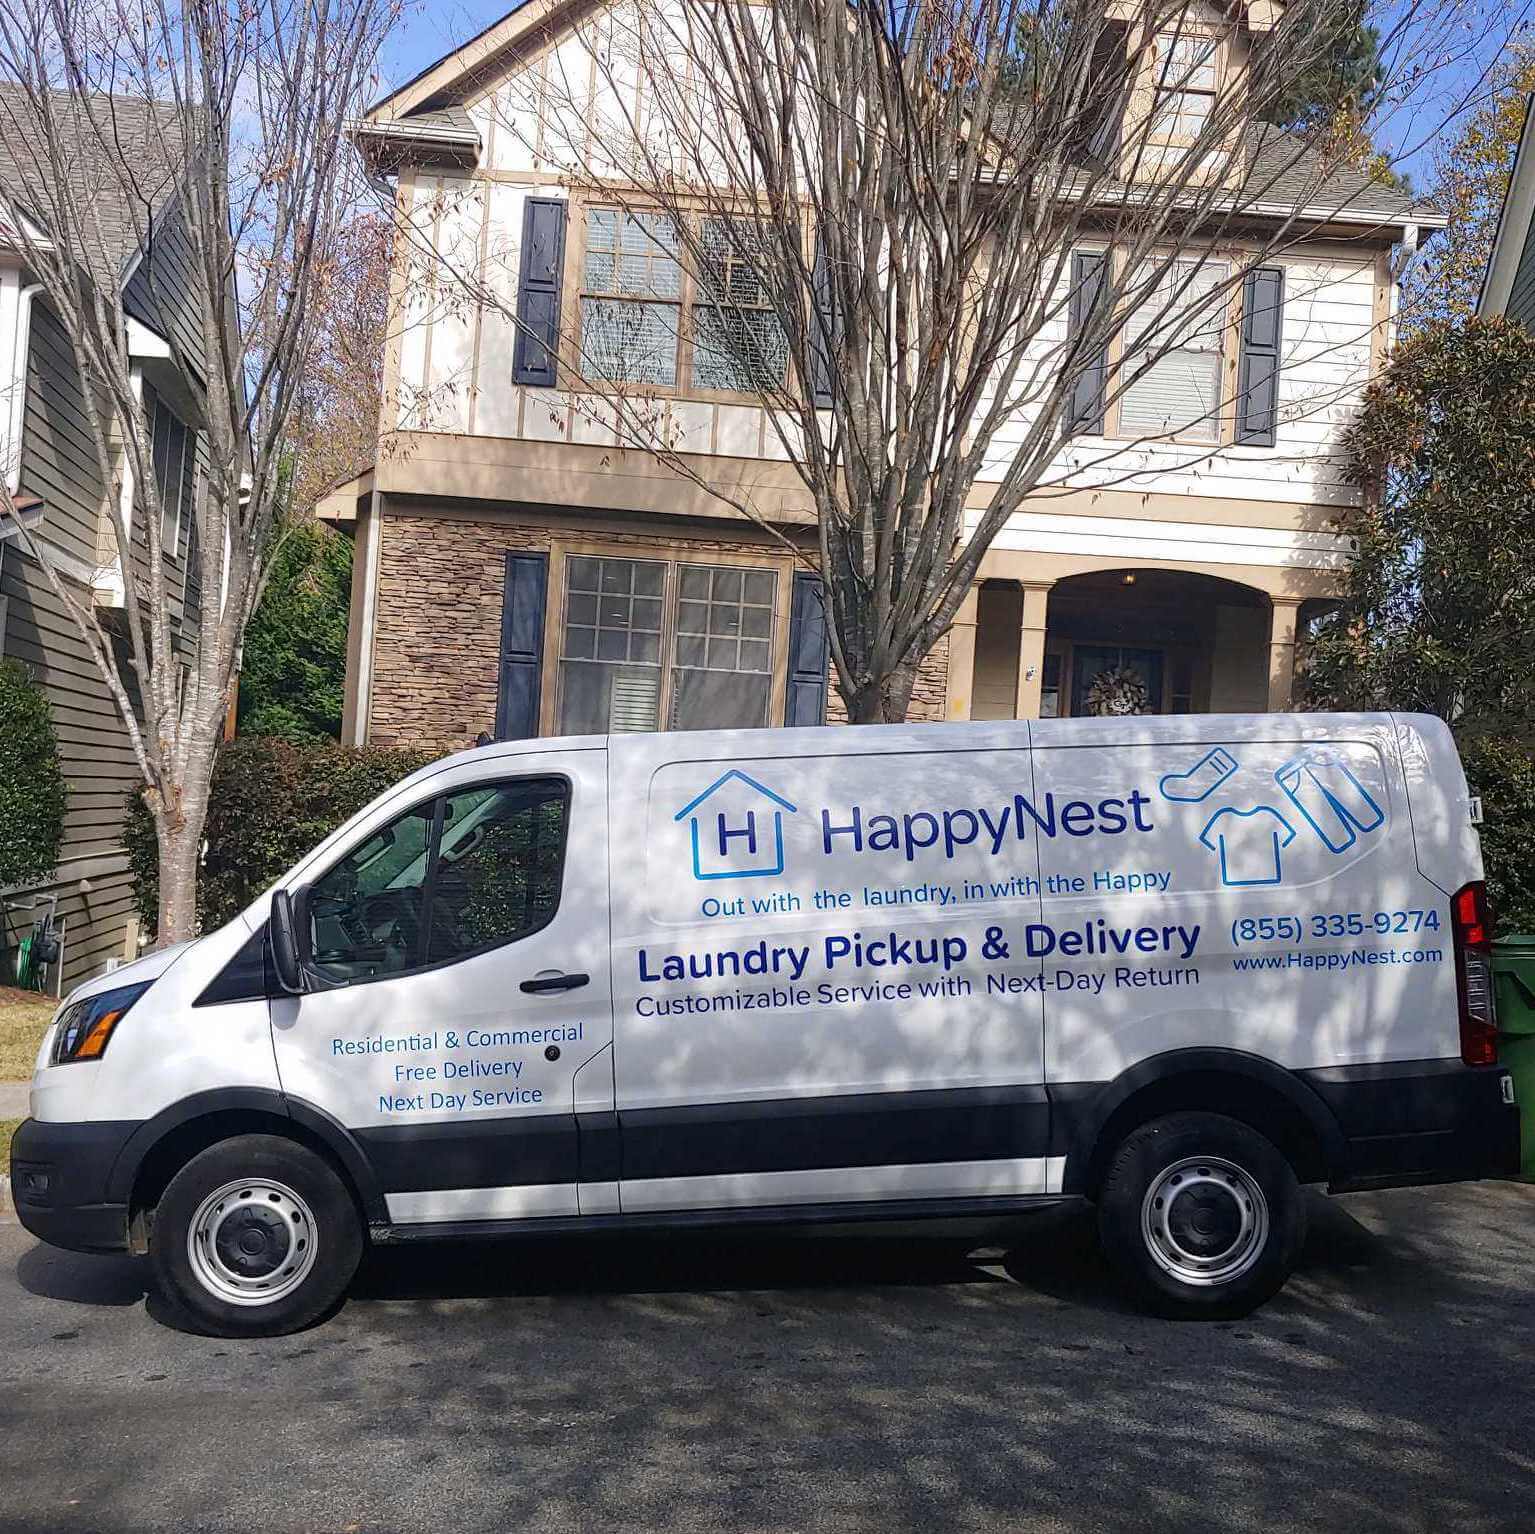 Welcome Ohio and Virginia to the HappyNest Laundry Service family!